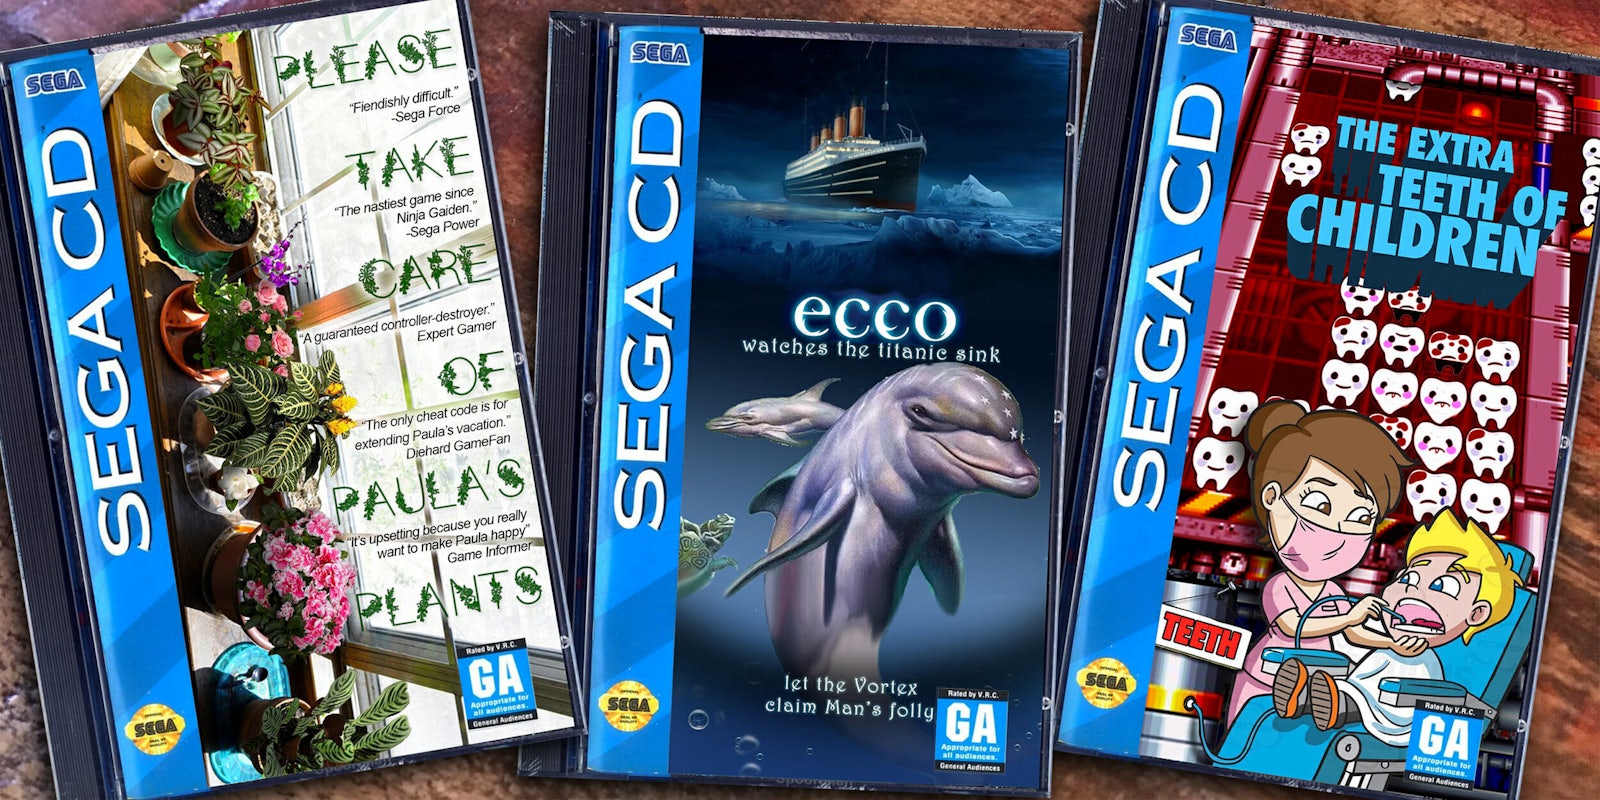 fake Sega CD games 'Please Take Care of Paula's Plants', 'ecco Watches the Titanic Sink', and 'The Extra Teeth of Children'